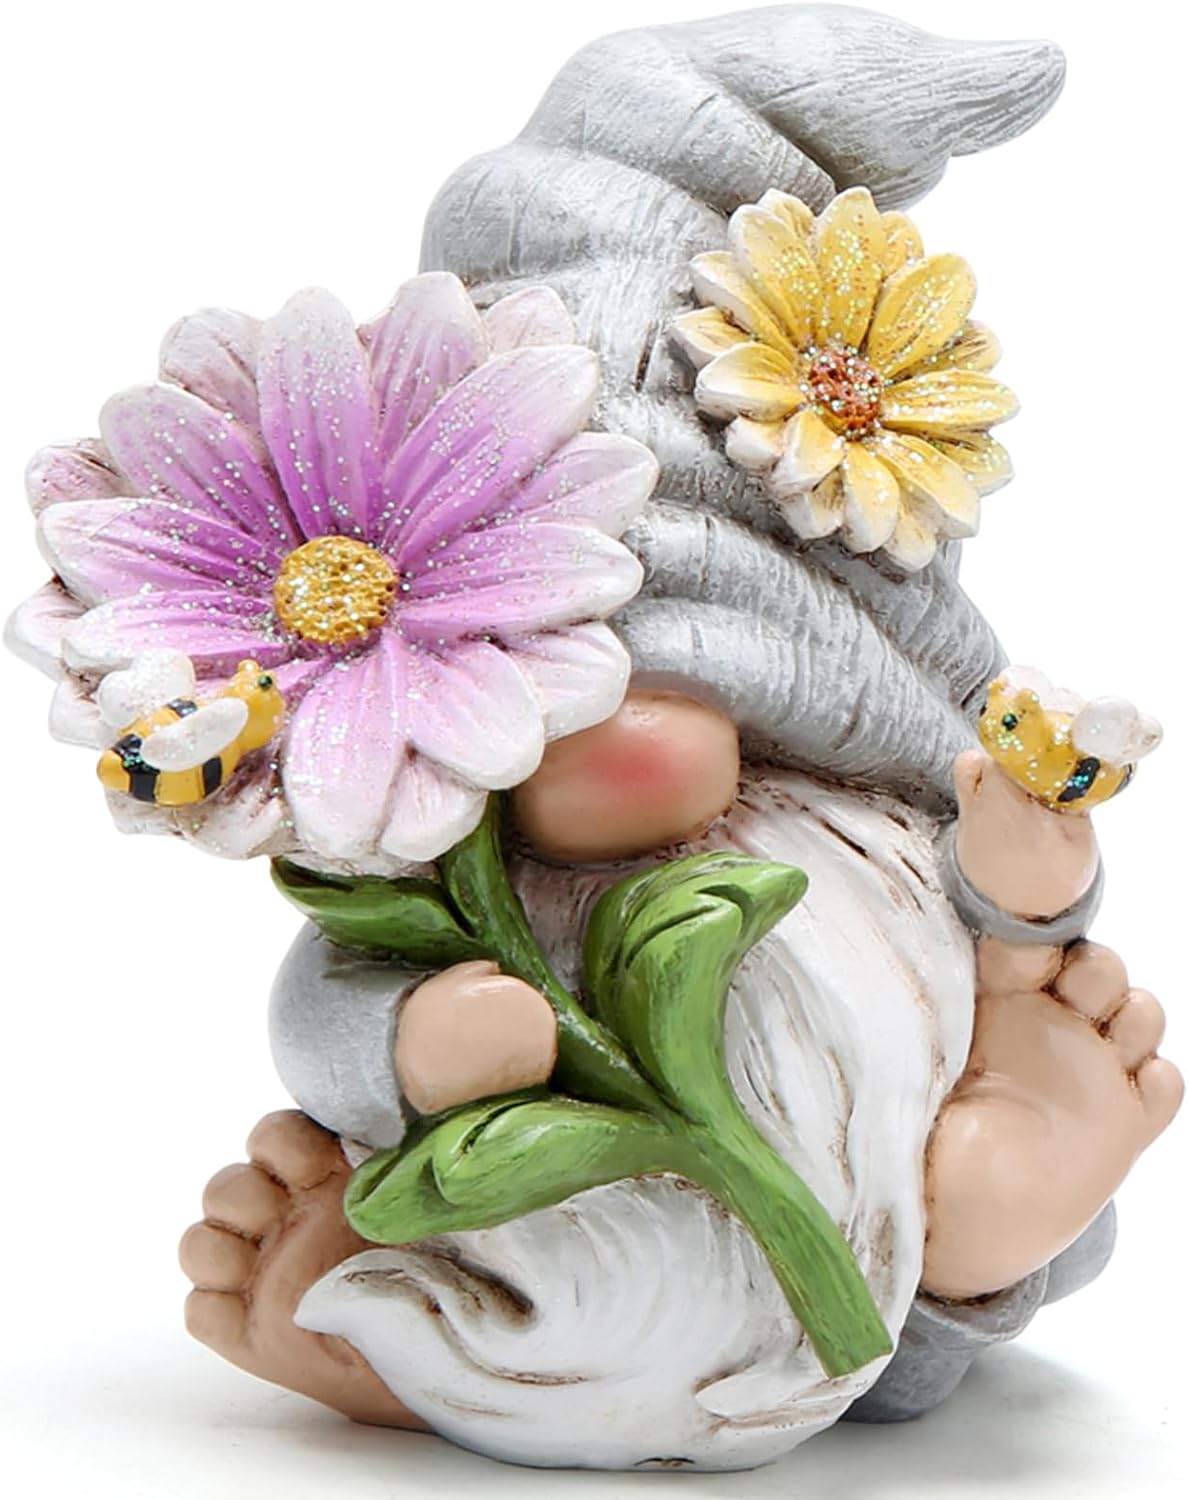 Gnome Decoration for Spring Gifts: Ornaments, Decor, Flower Gnomes Figurines of Summer Gnomes Gnomes in Spring for Garden D&#xE9;cor Spring Sculptures Gifts for Outdoor Decor for Mom, Grandma (Grey-Man)